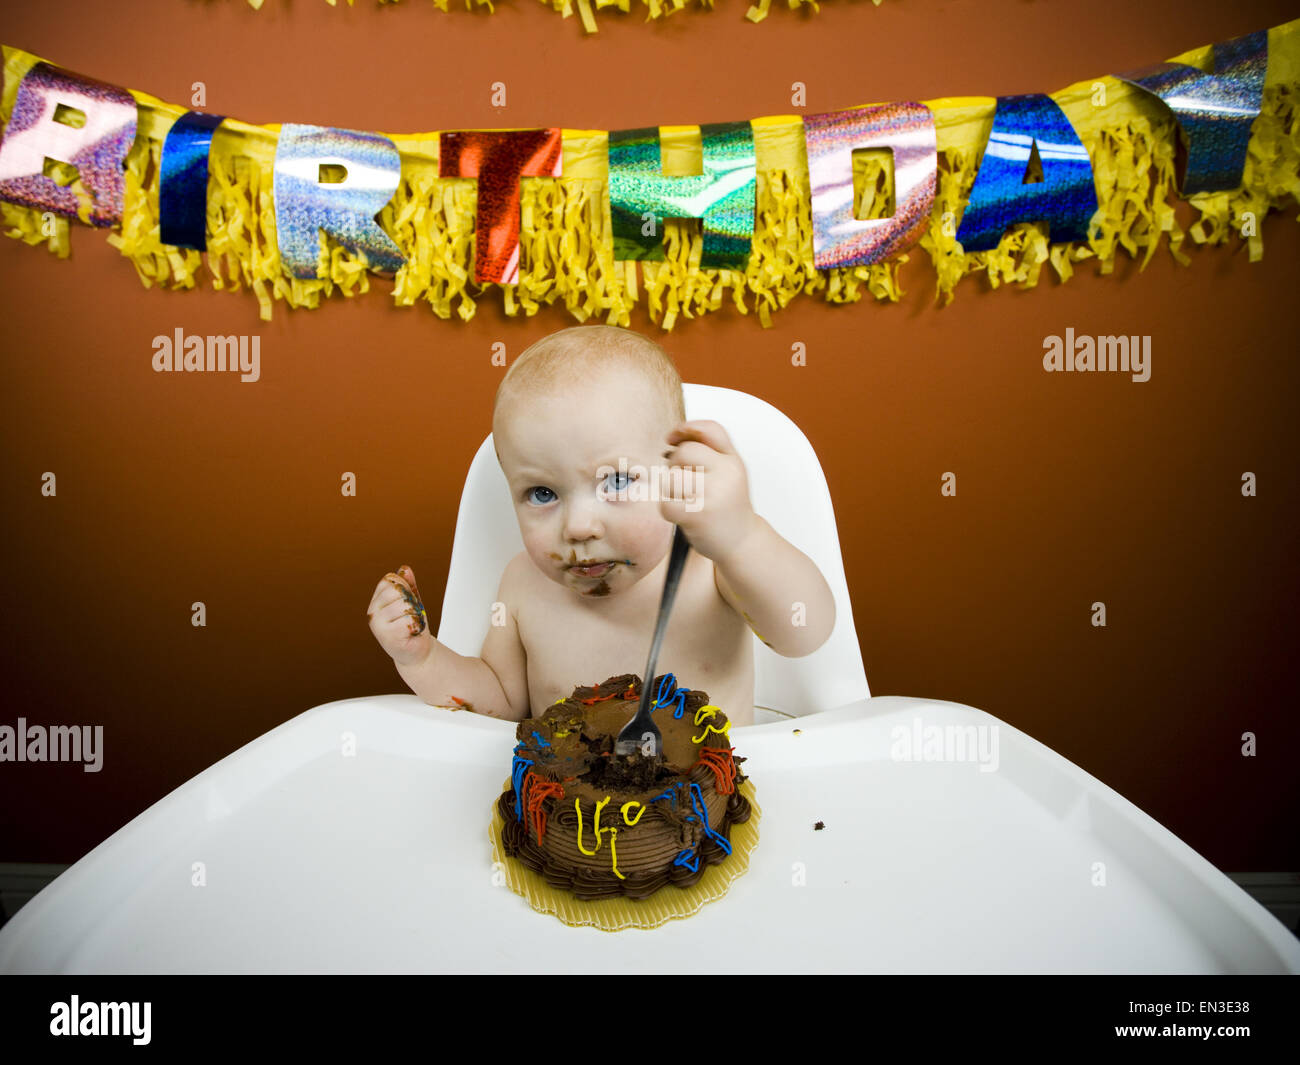 Baby eating cake Banque D'Images